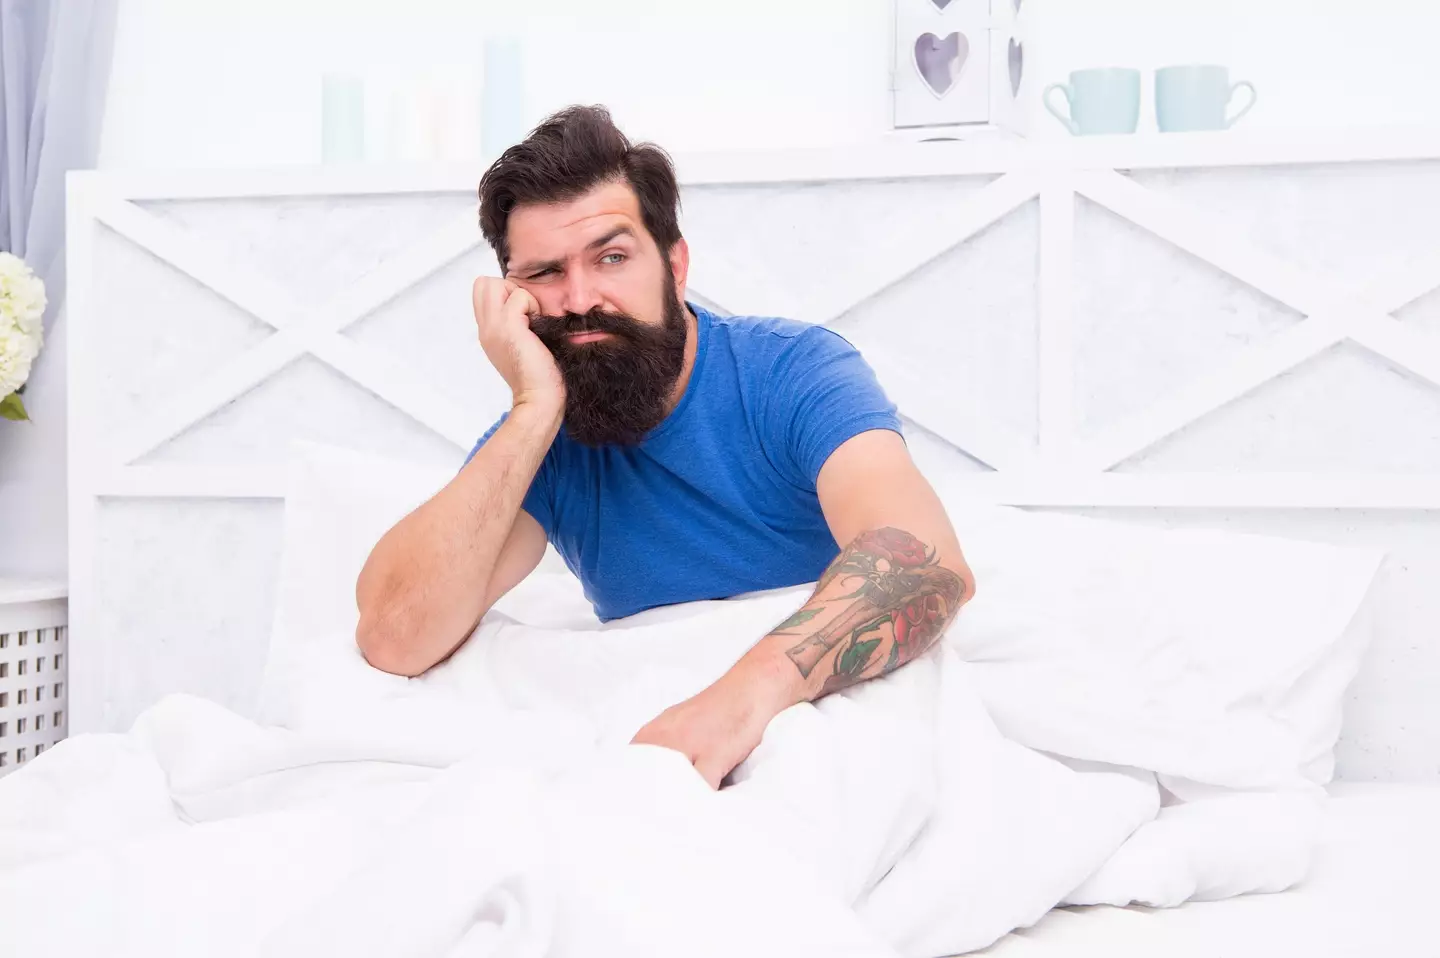 The loss of morning erections is key to recognising you may have a problem with your testosterone levels.